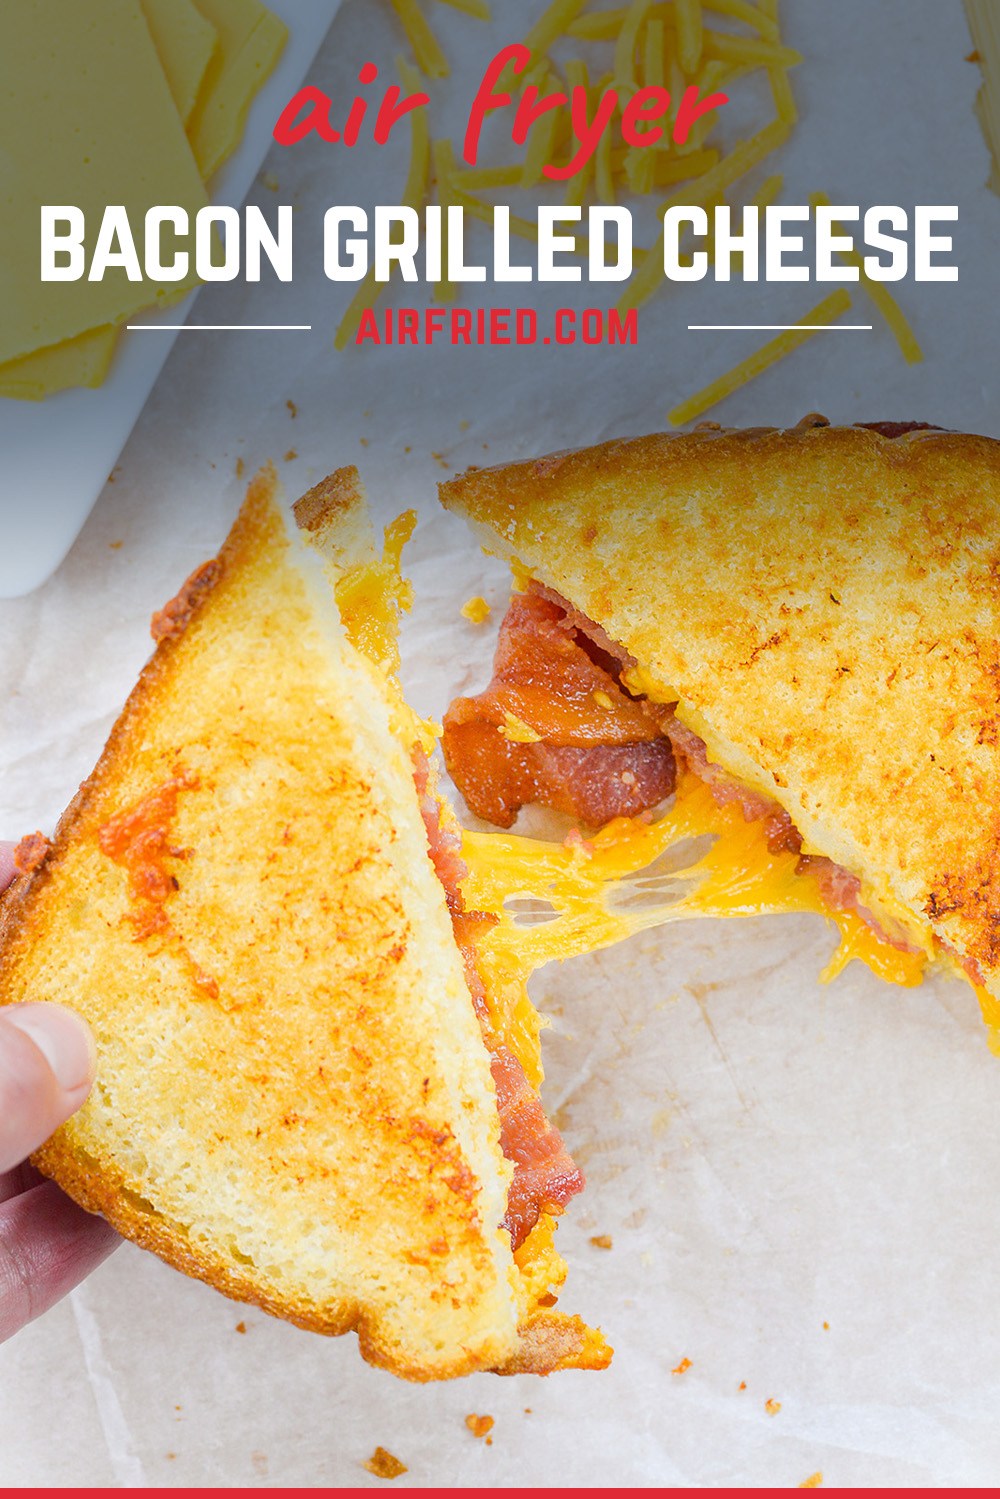 We made this bacon grilled cheese sandwich in the air fryer!  It was really easy and the bread toasted perfectly!